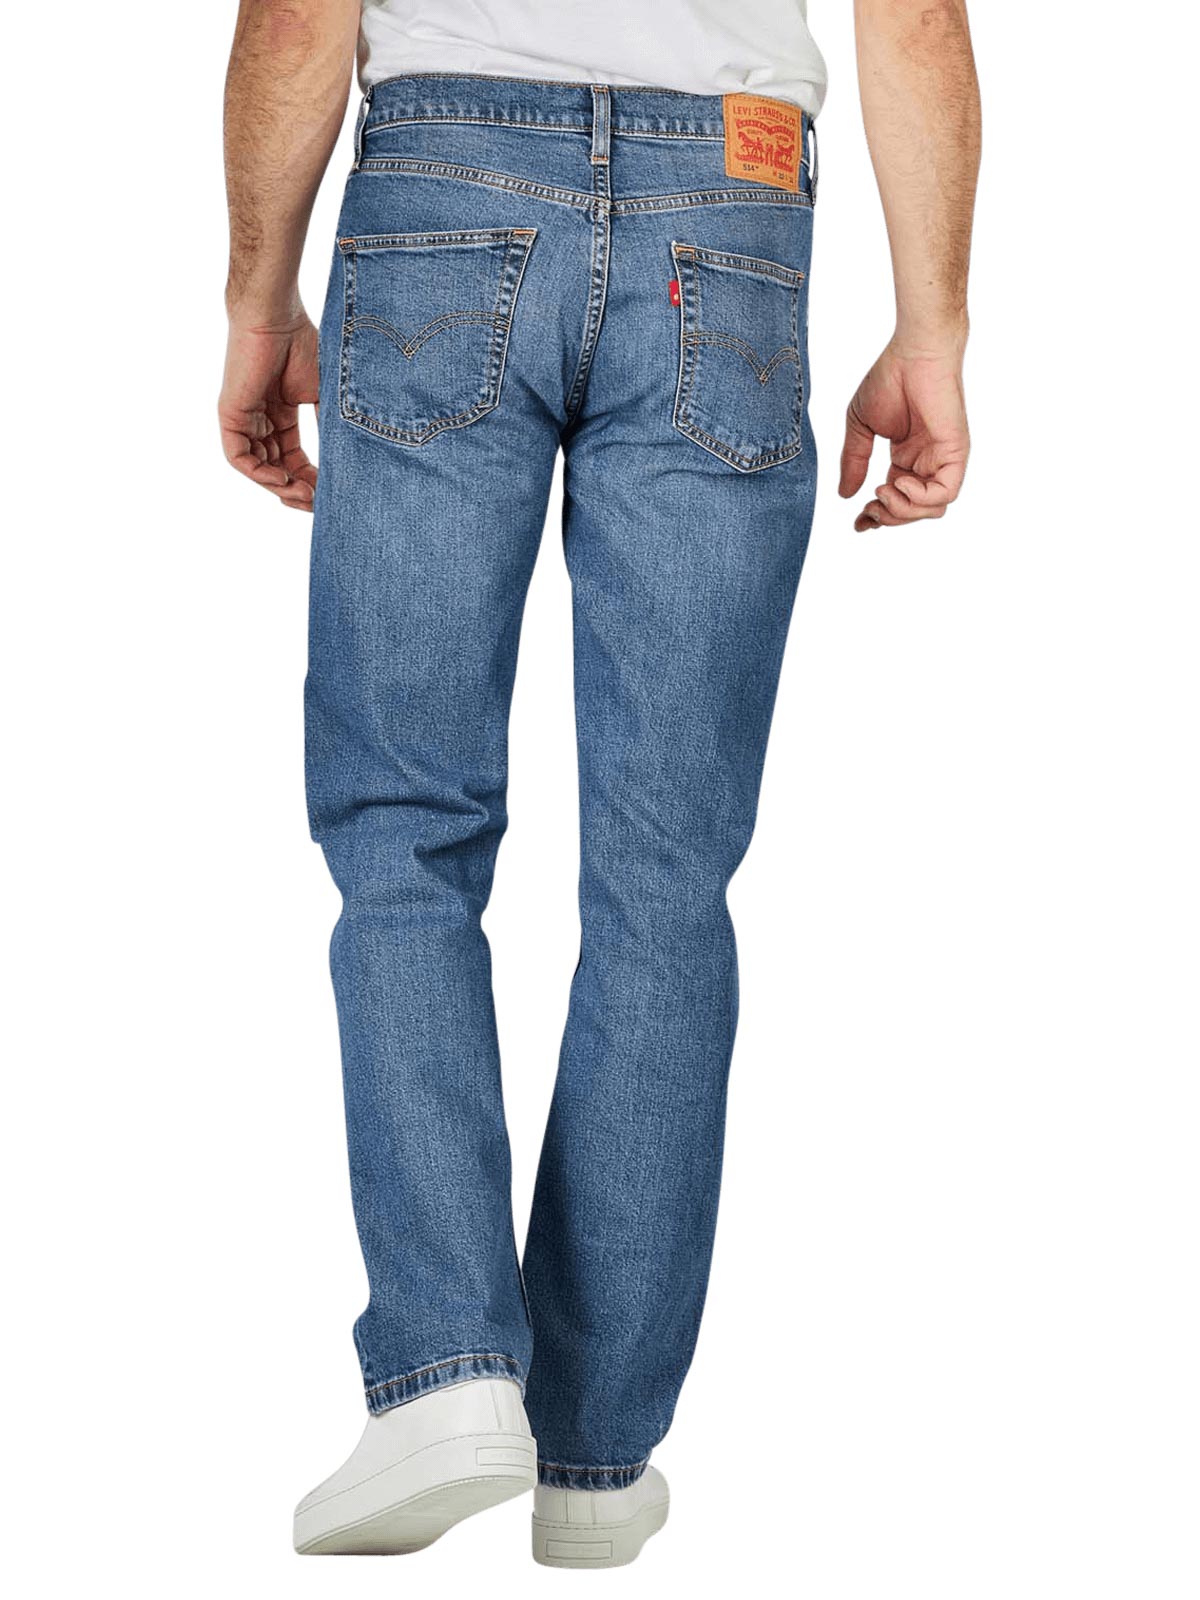 Levi's 514 Jeans Straight Fit Medium Indigo Worn In Levi's Men's Jeans |  Free Shipping on  - SIMPLY LOOK GOOD